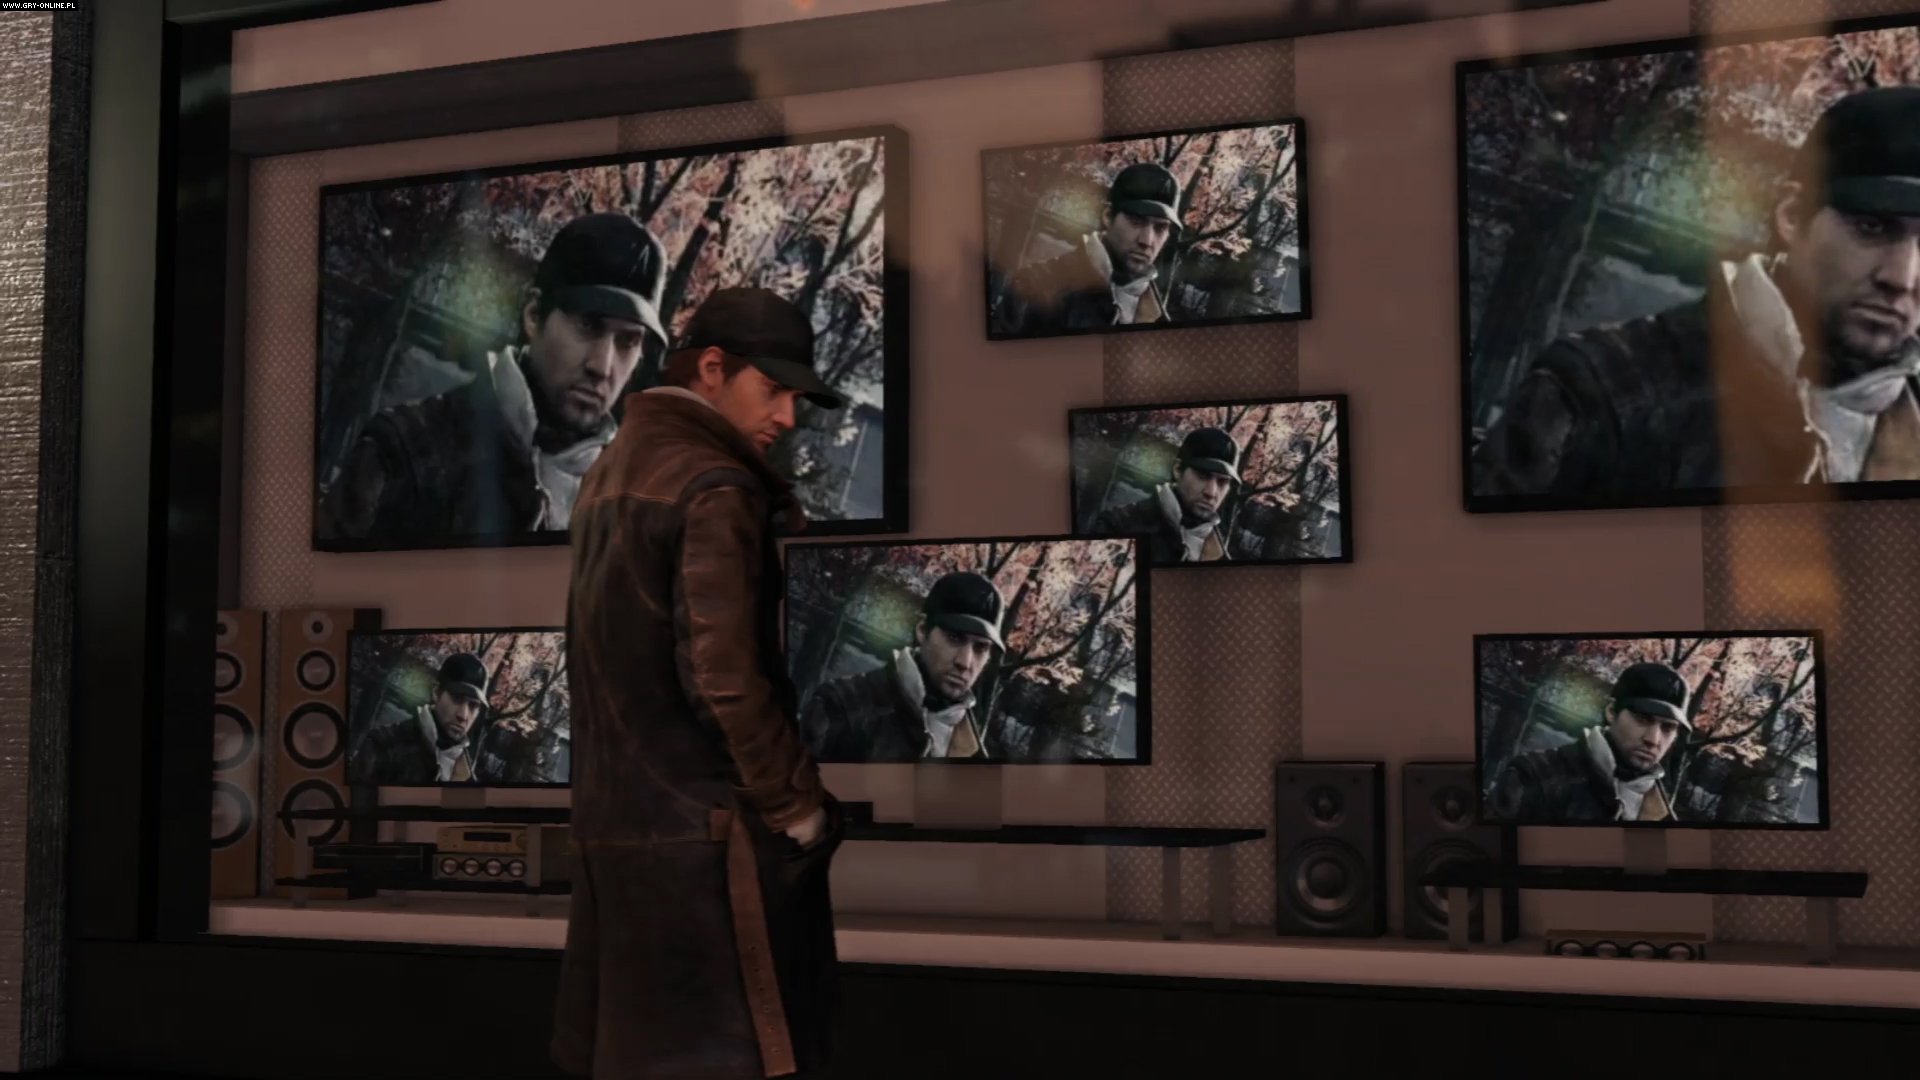 video game, watch dogs, aiden pearce wallpaper for mobile